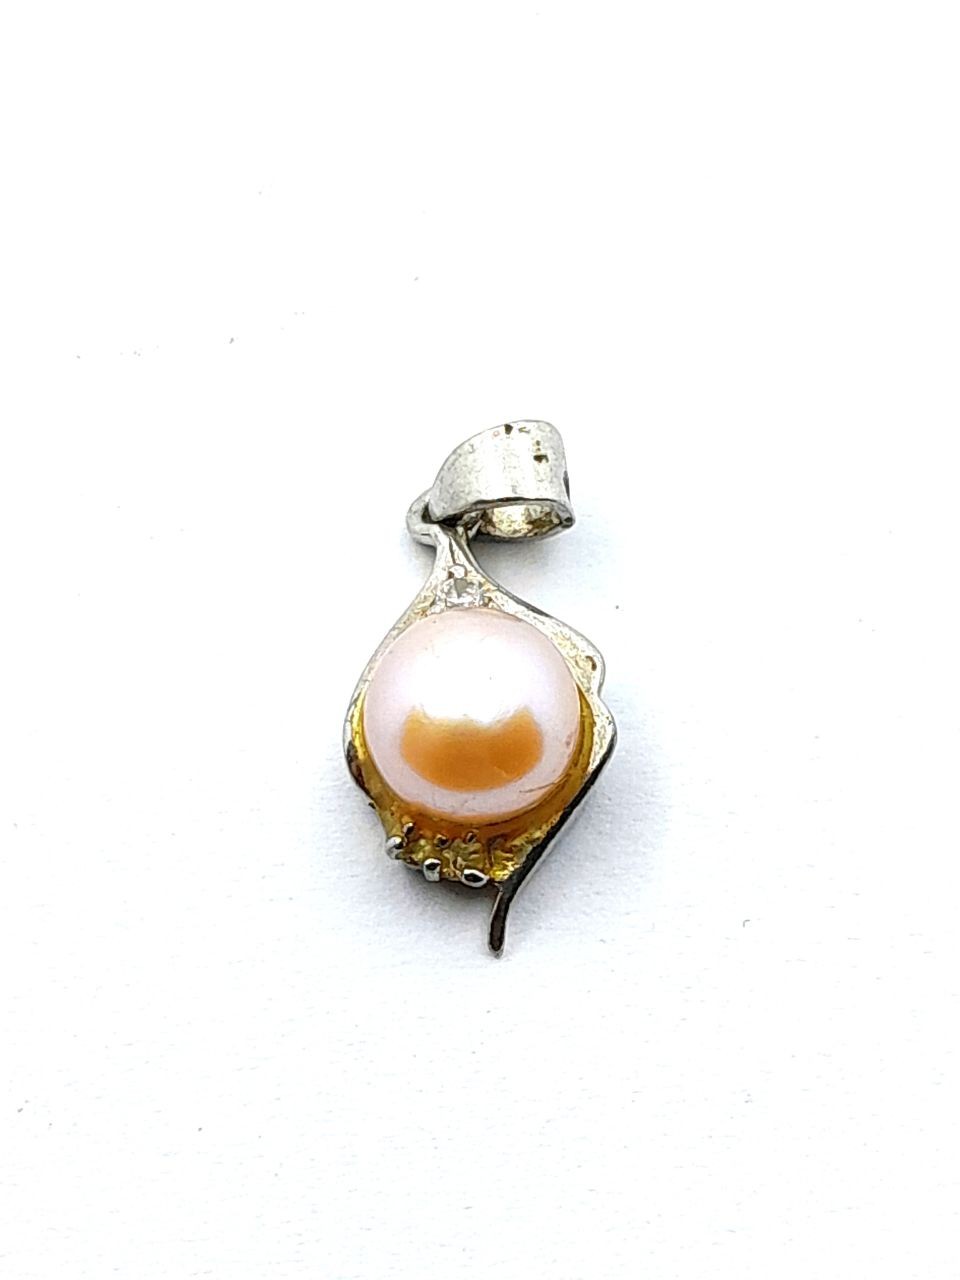 Silver pendant with pearls